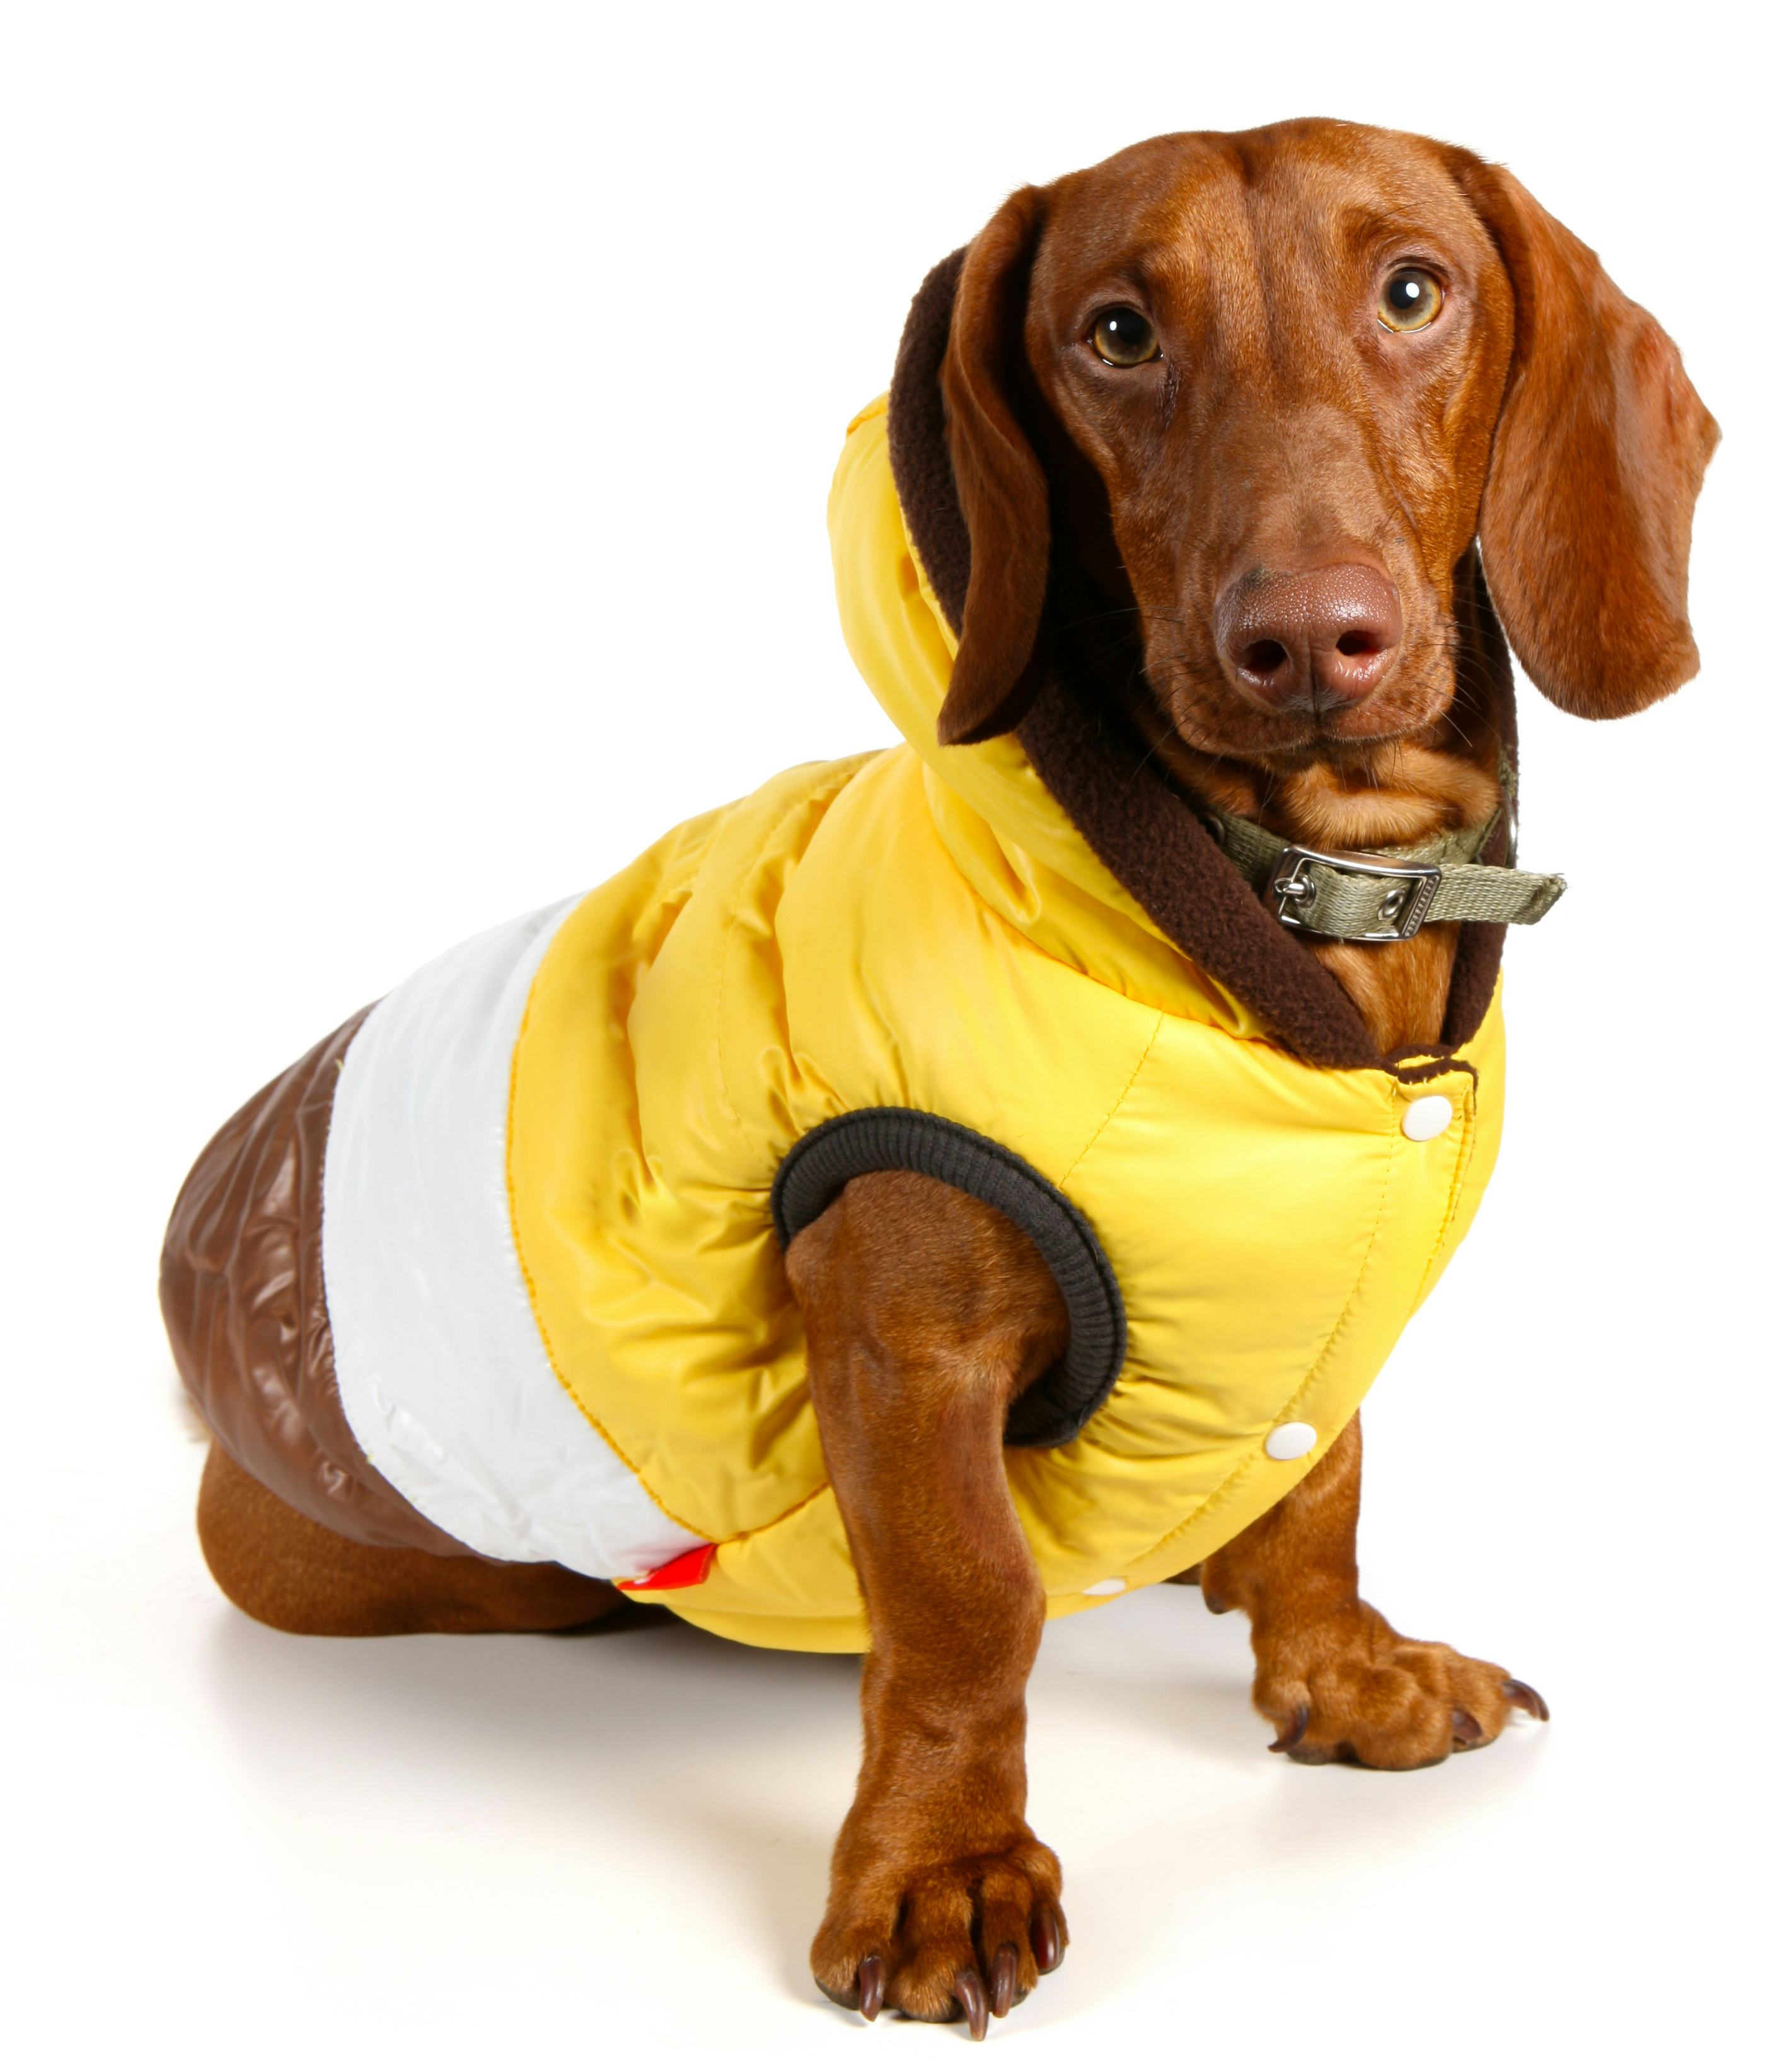 a picture of a dog in yellow and white